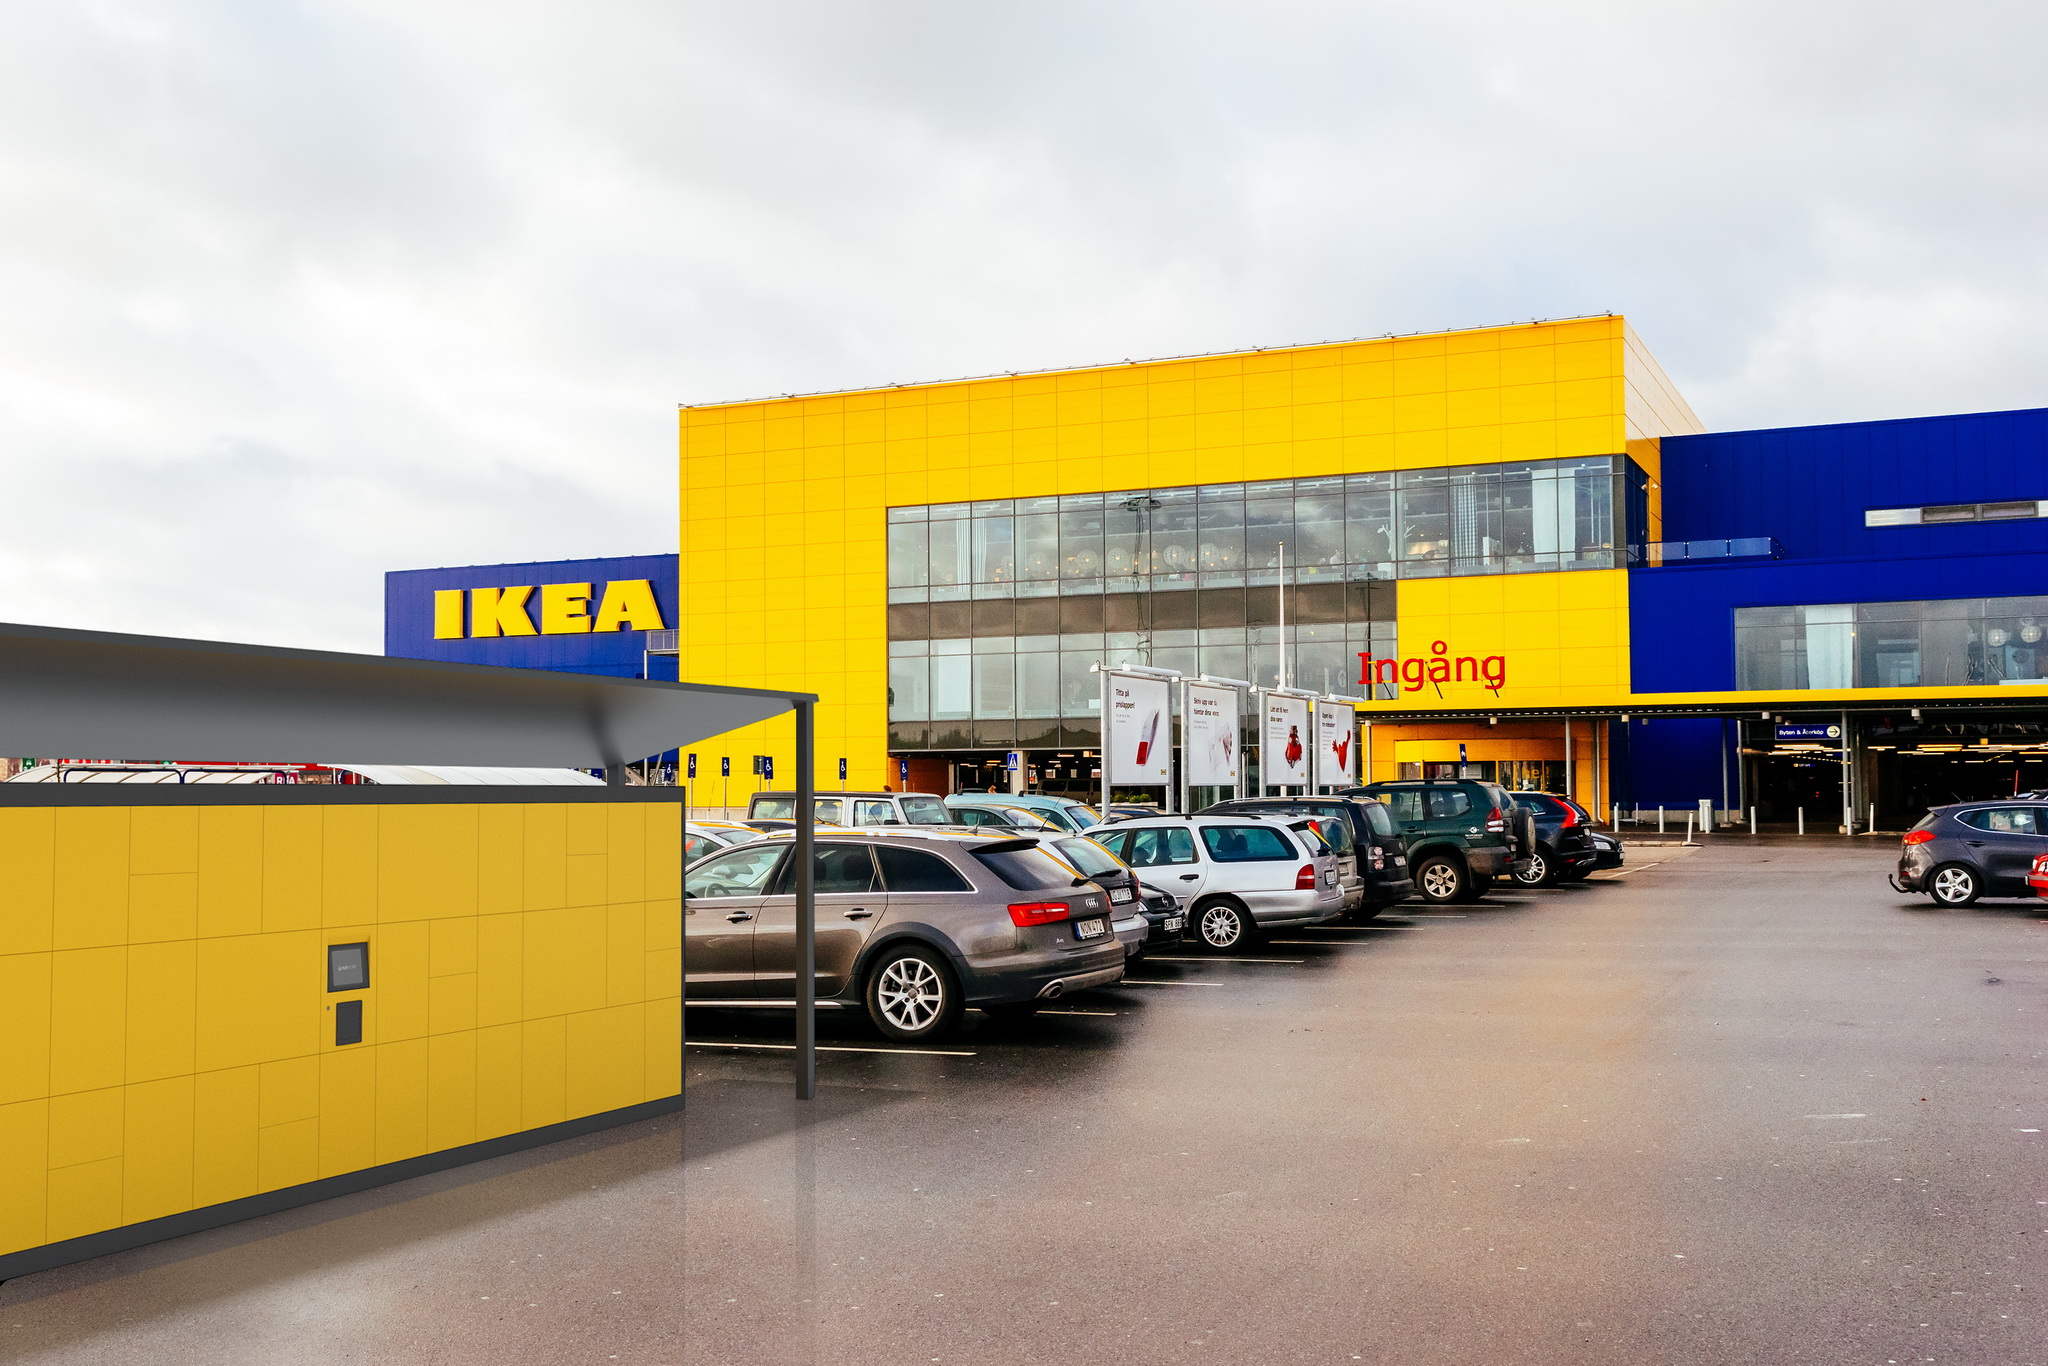 MALMO, SWEDEN – JANUARY 2, 2015: Parking and facade of IKEA store in Malmo, Sweden